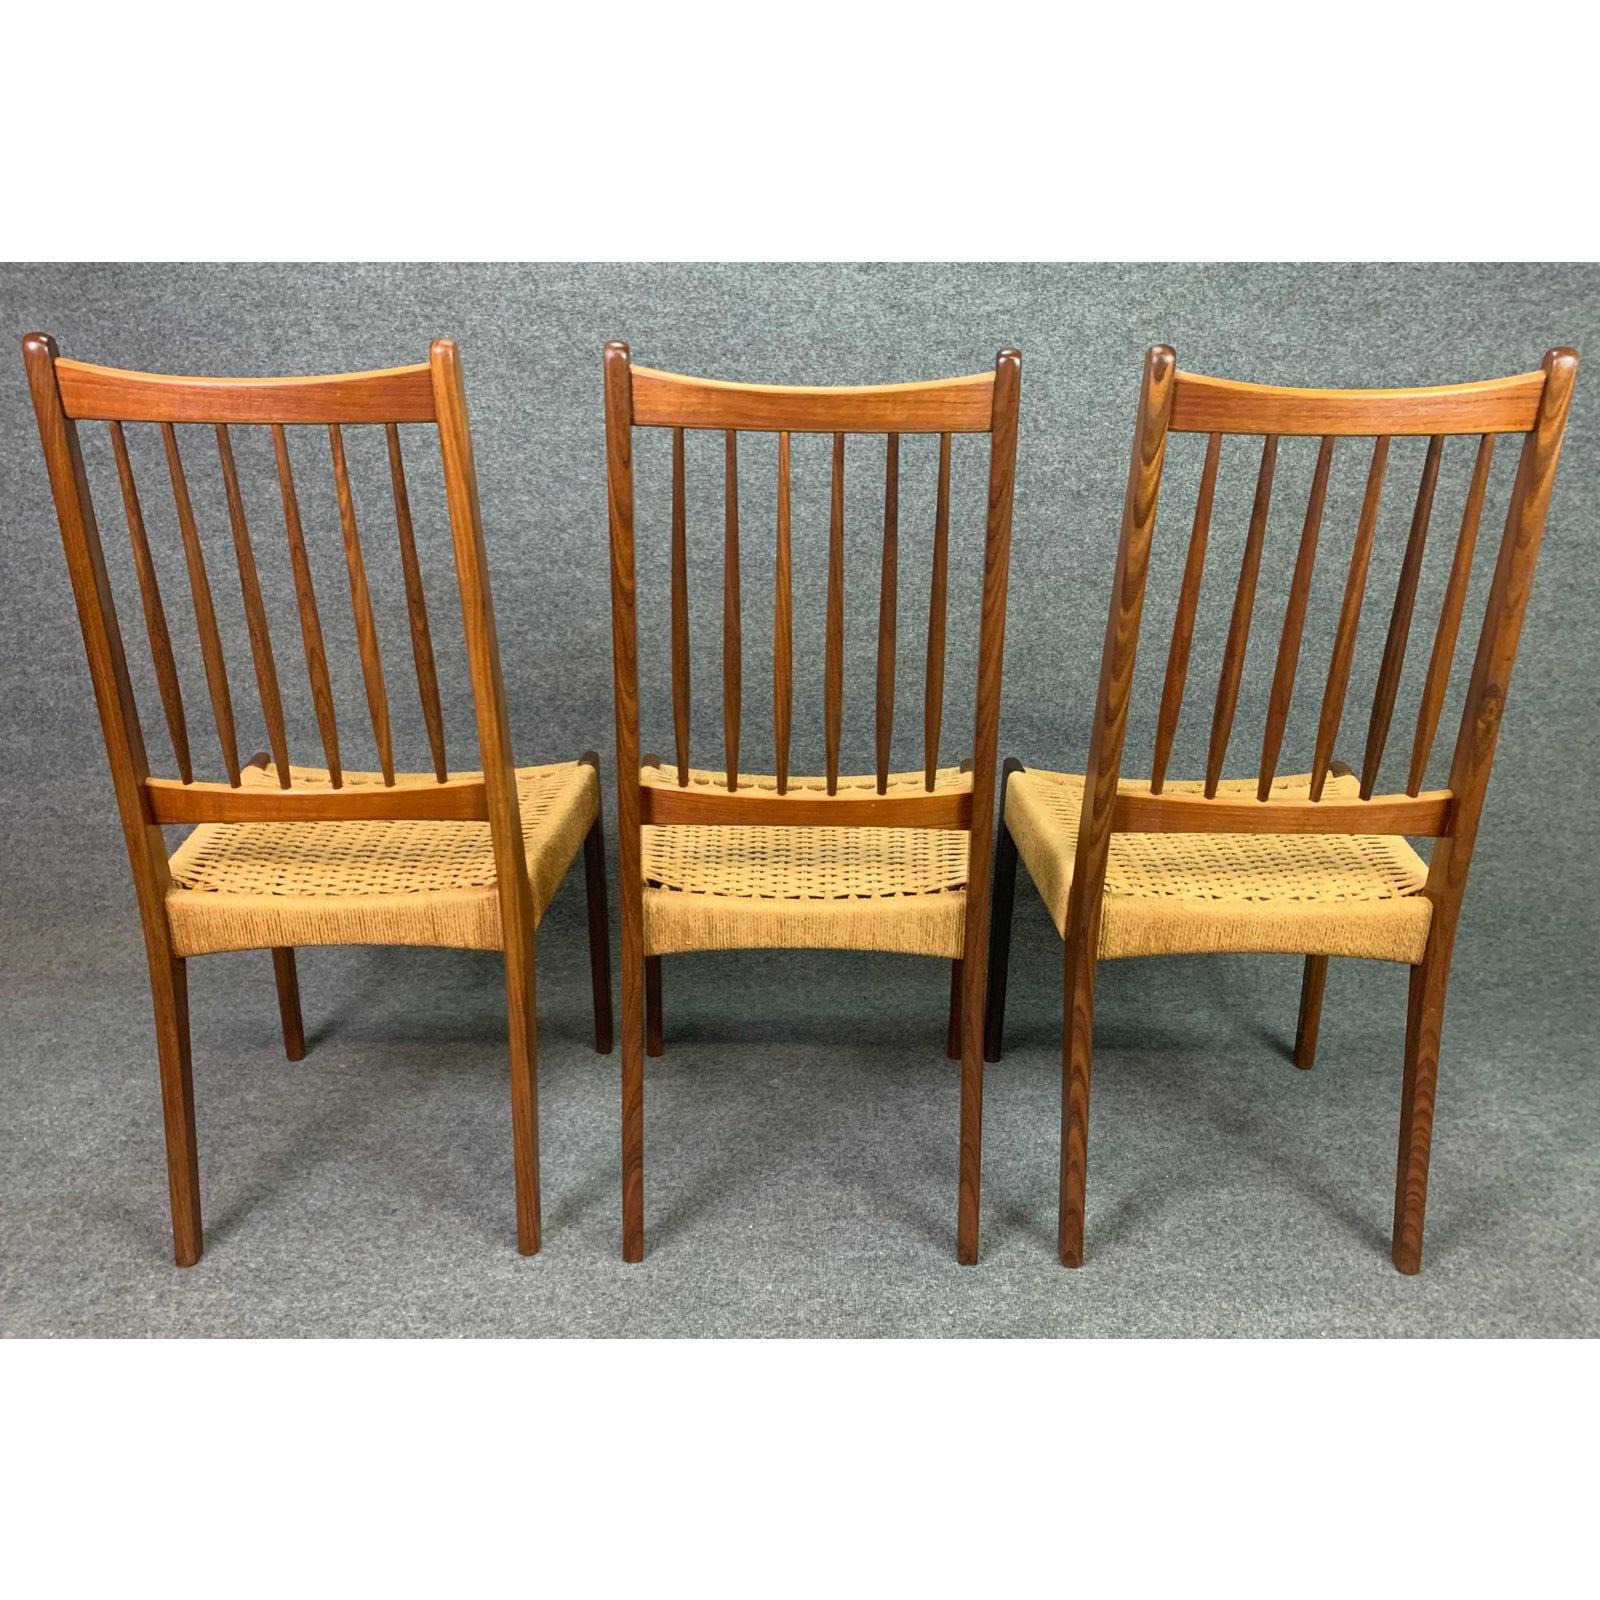 Mid-20th Century Vintage Danish Mid-Century Modern Teak High Back Dining Chairs, Set of Six For Sale